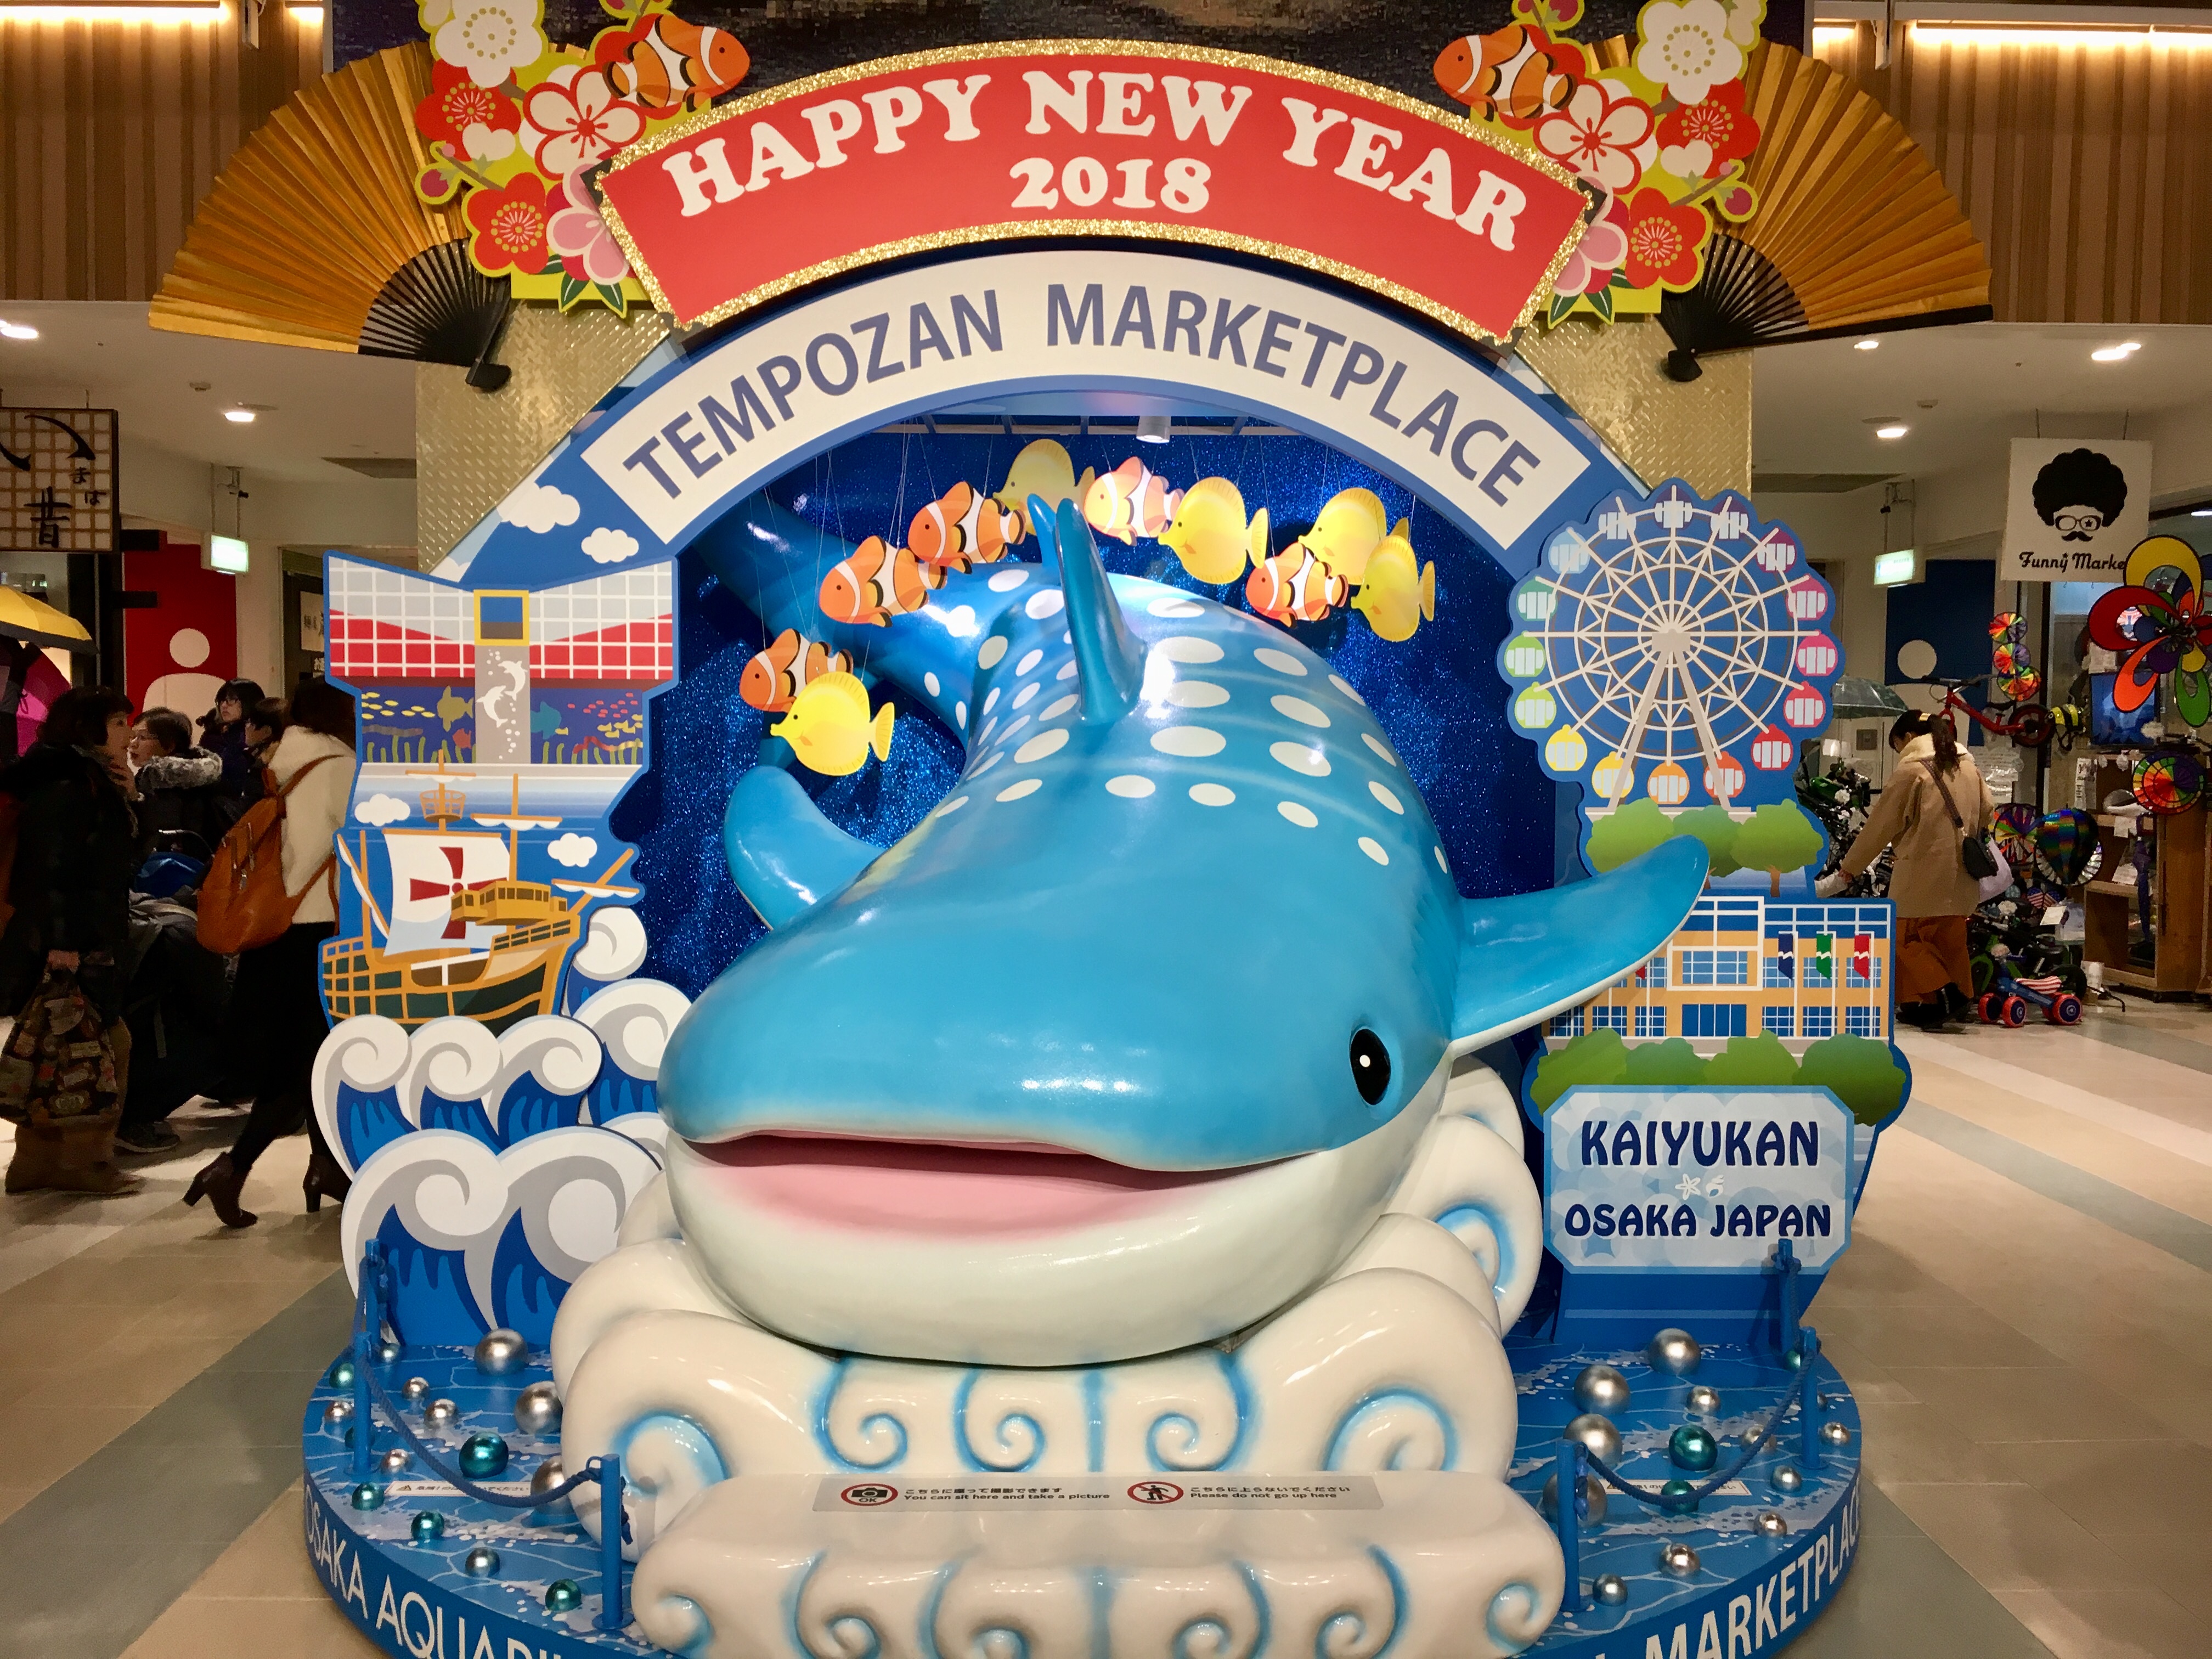 adorable character statue of a whale shark at tempozan harbor village